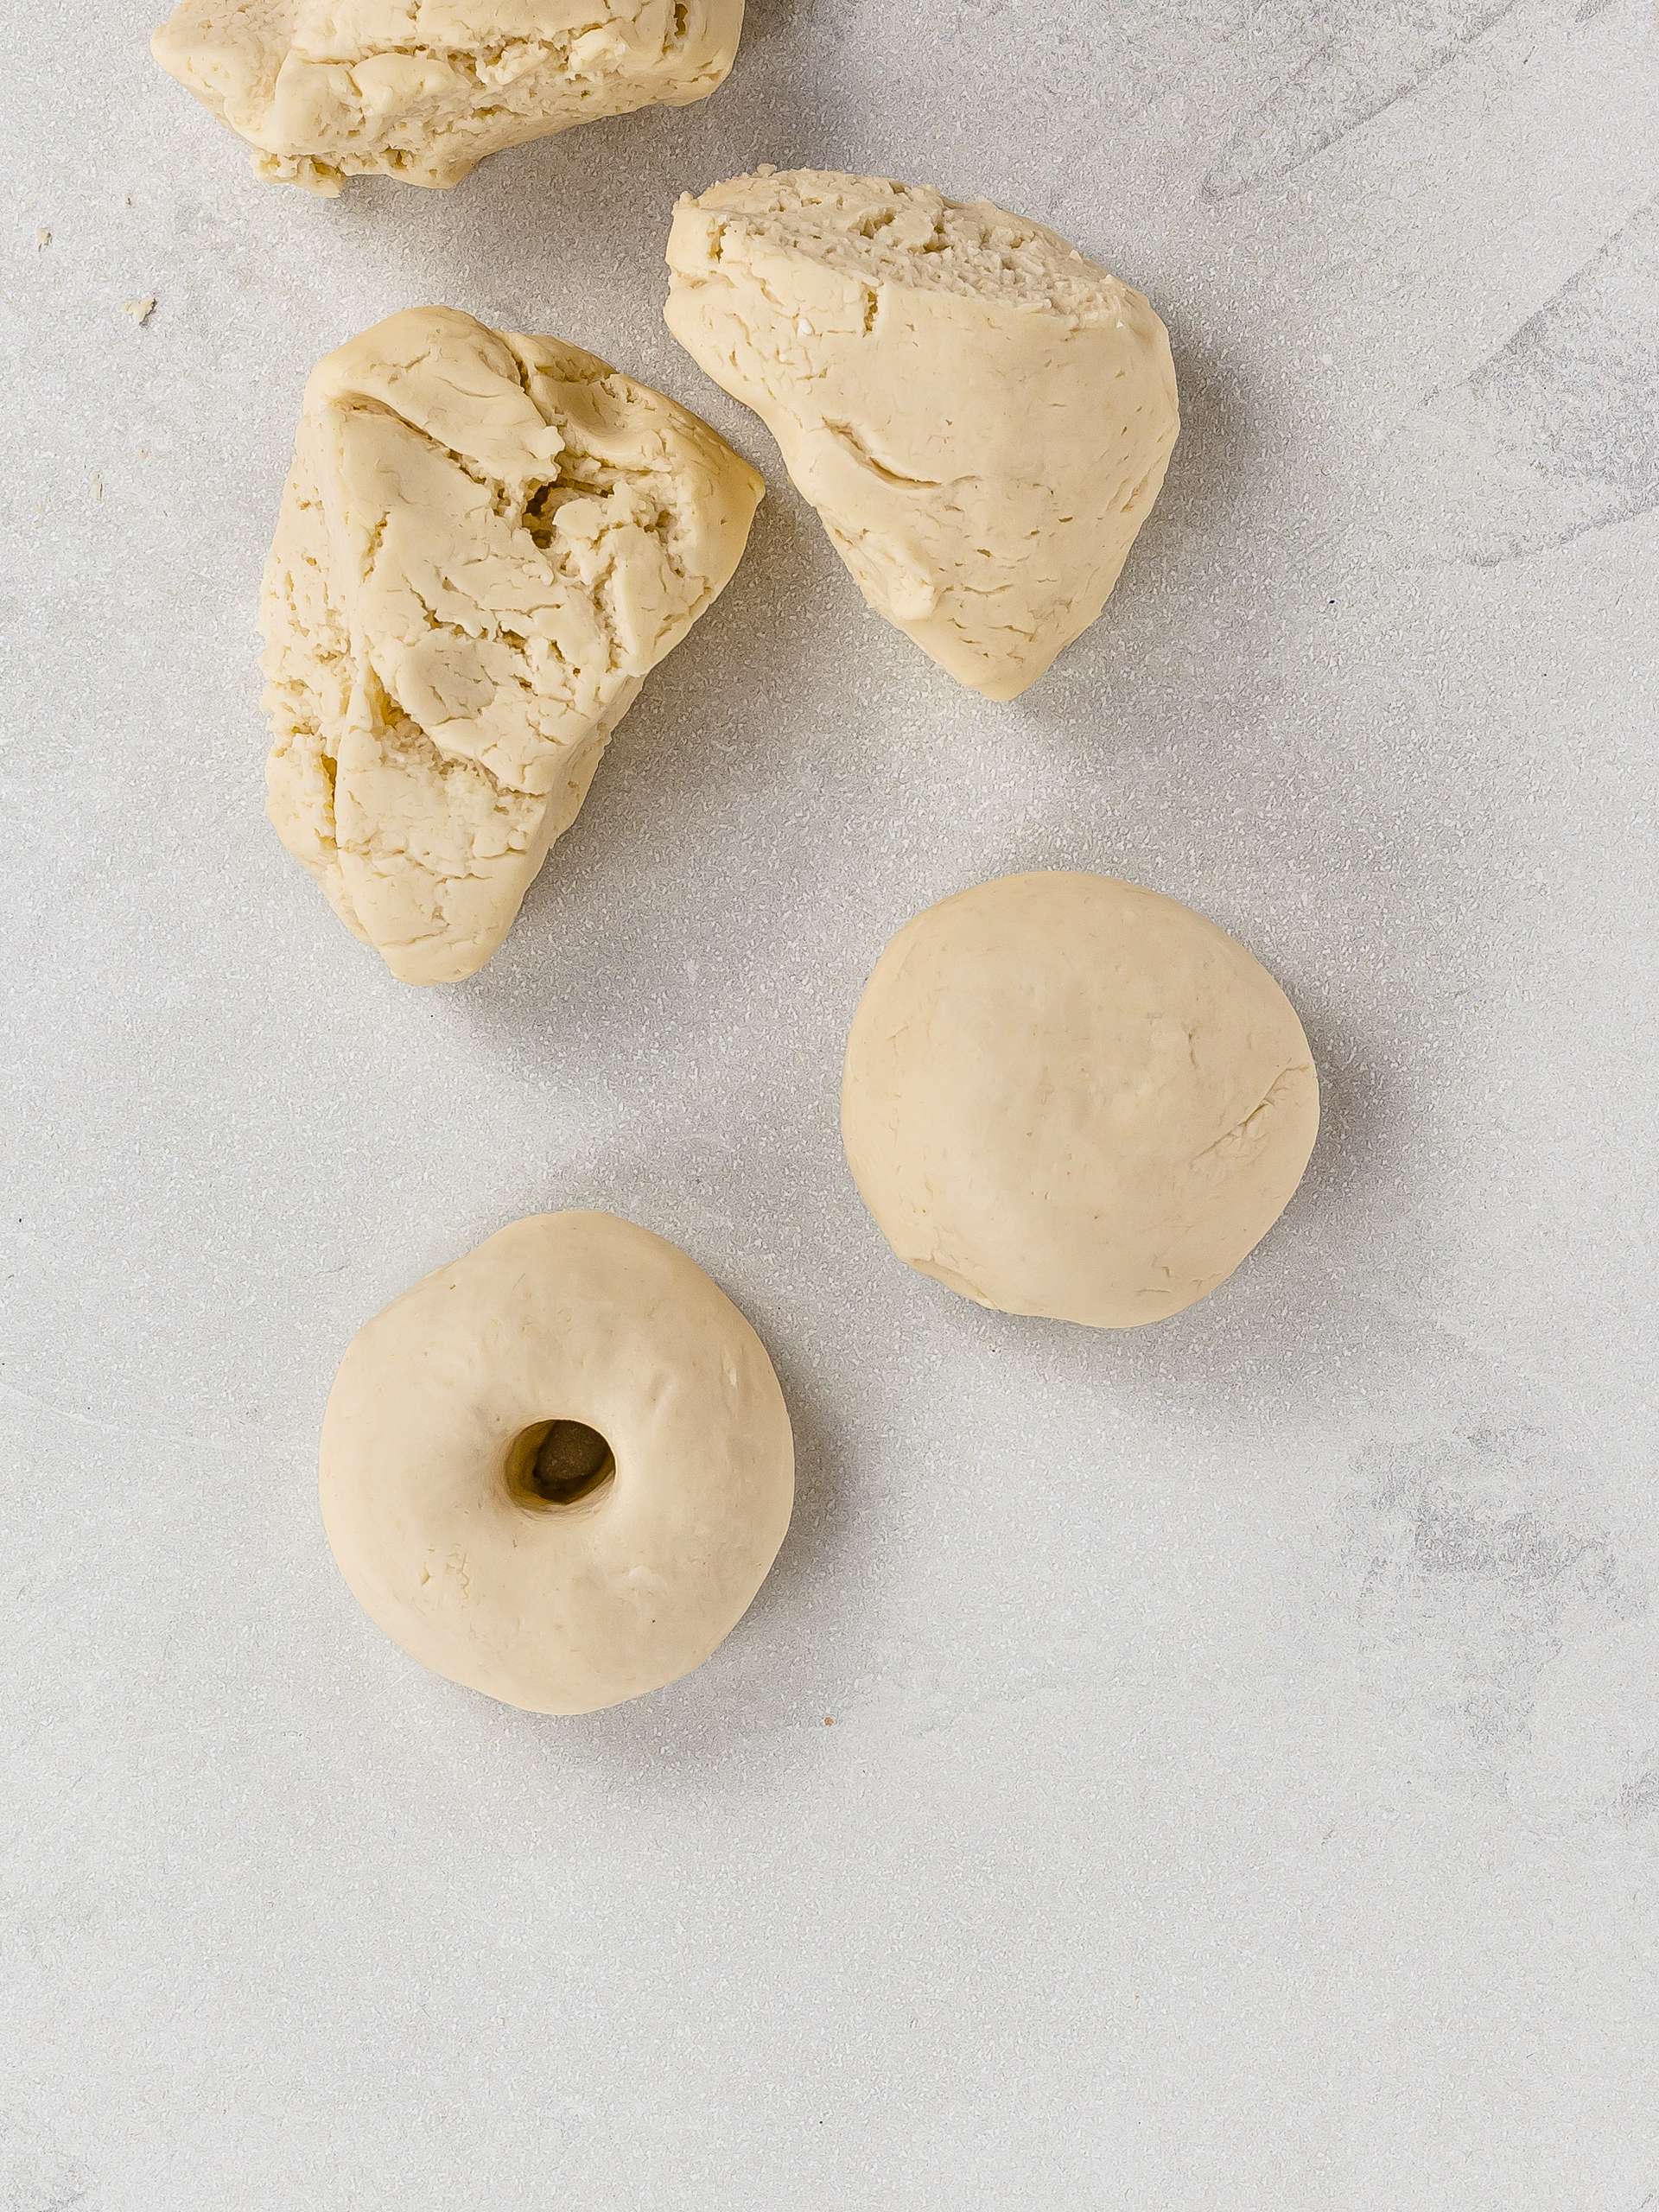 how to shape gluten free bagels